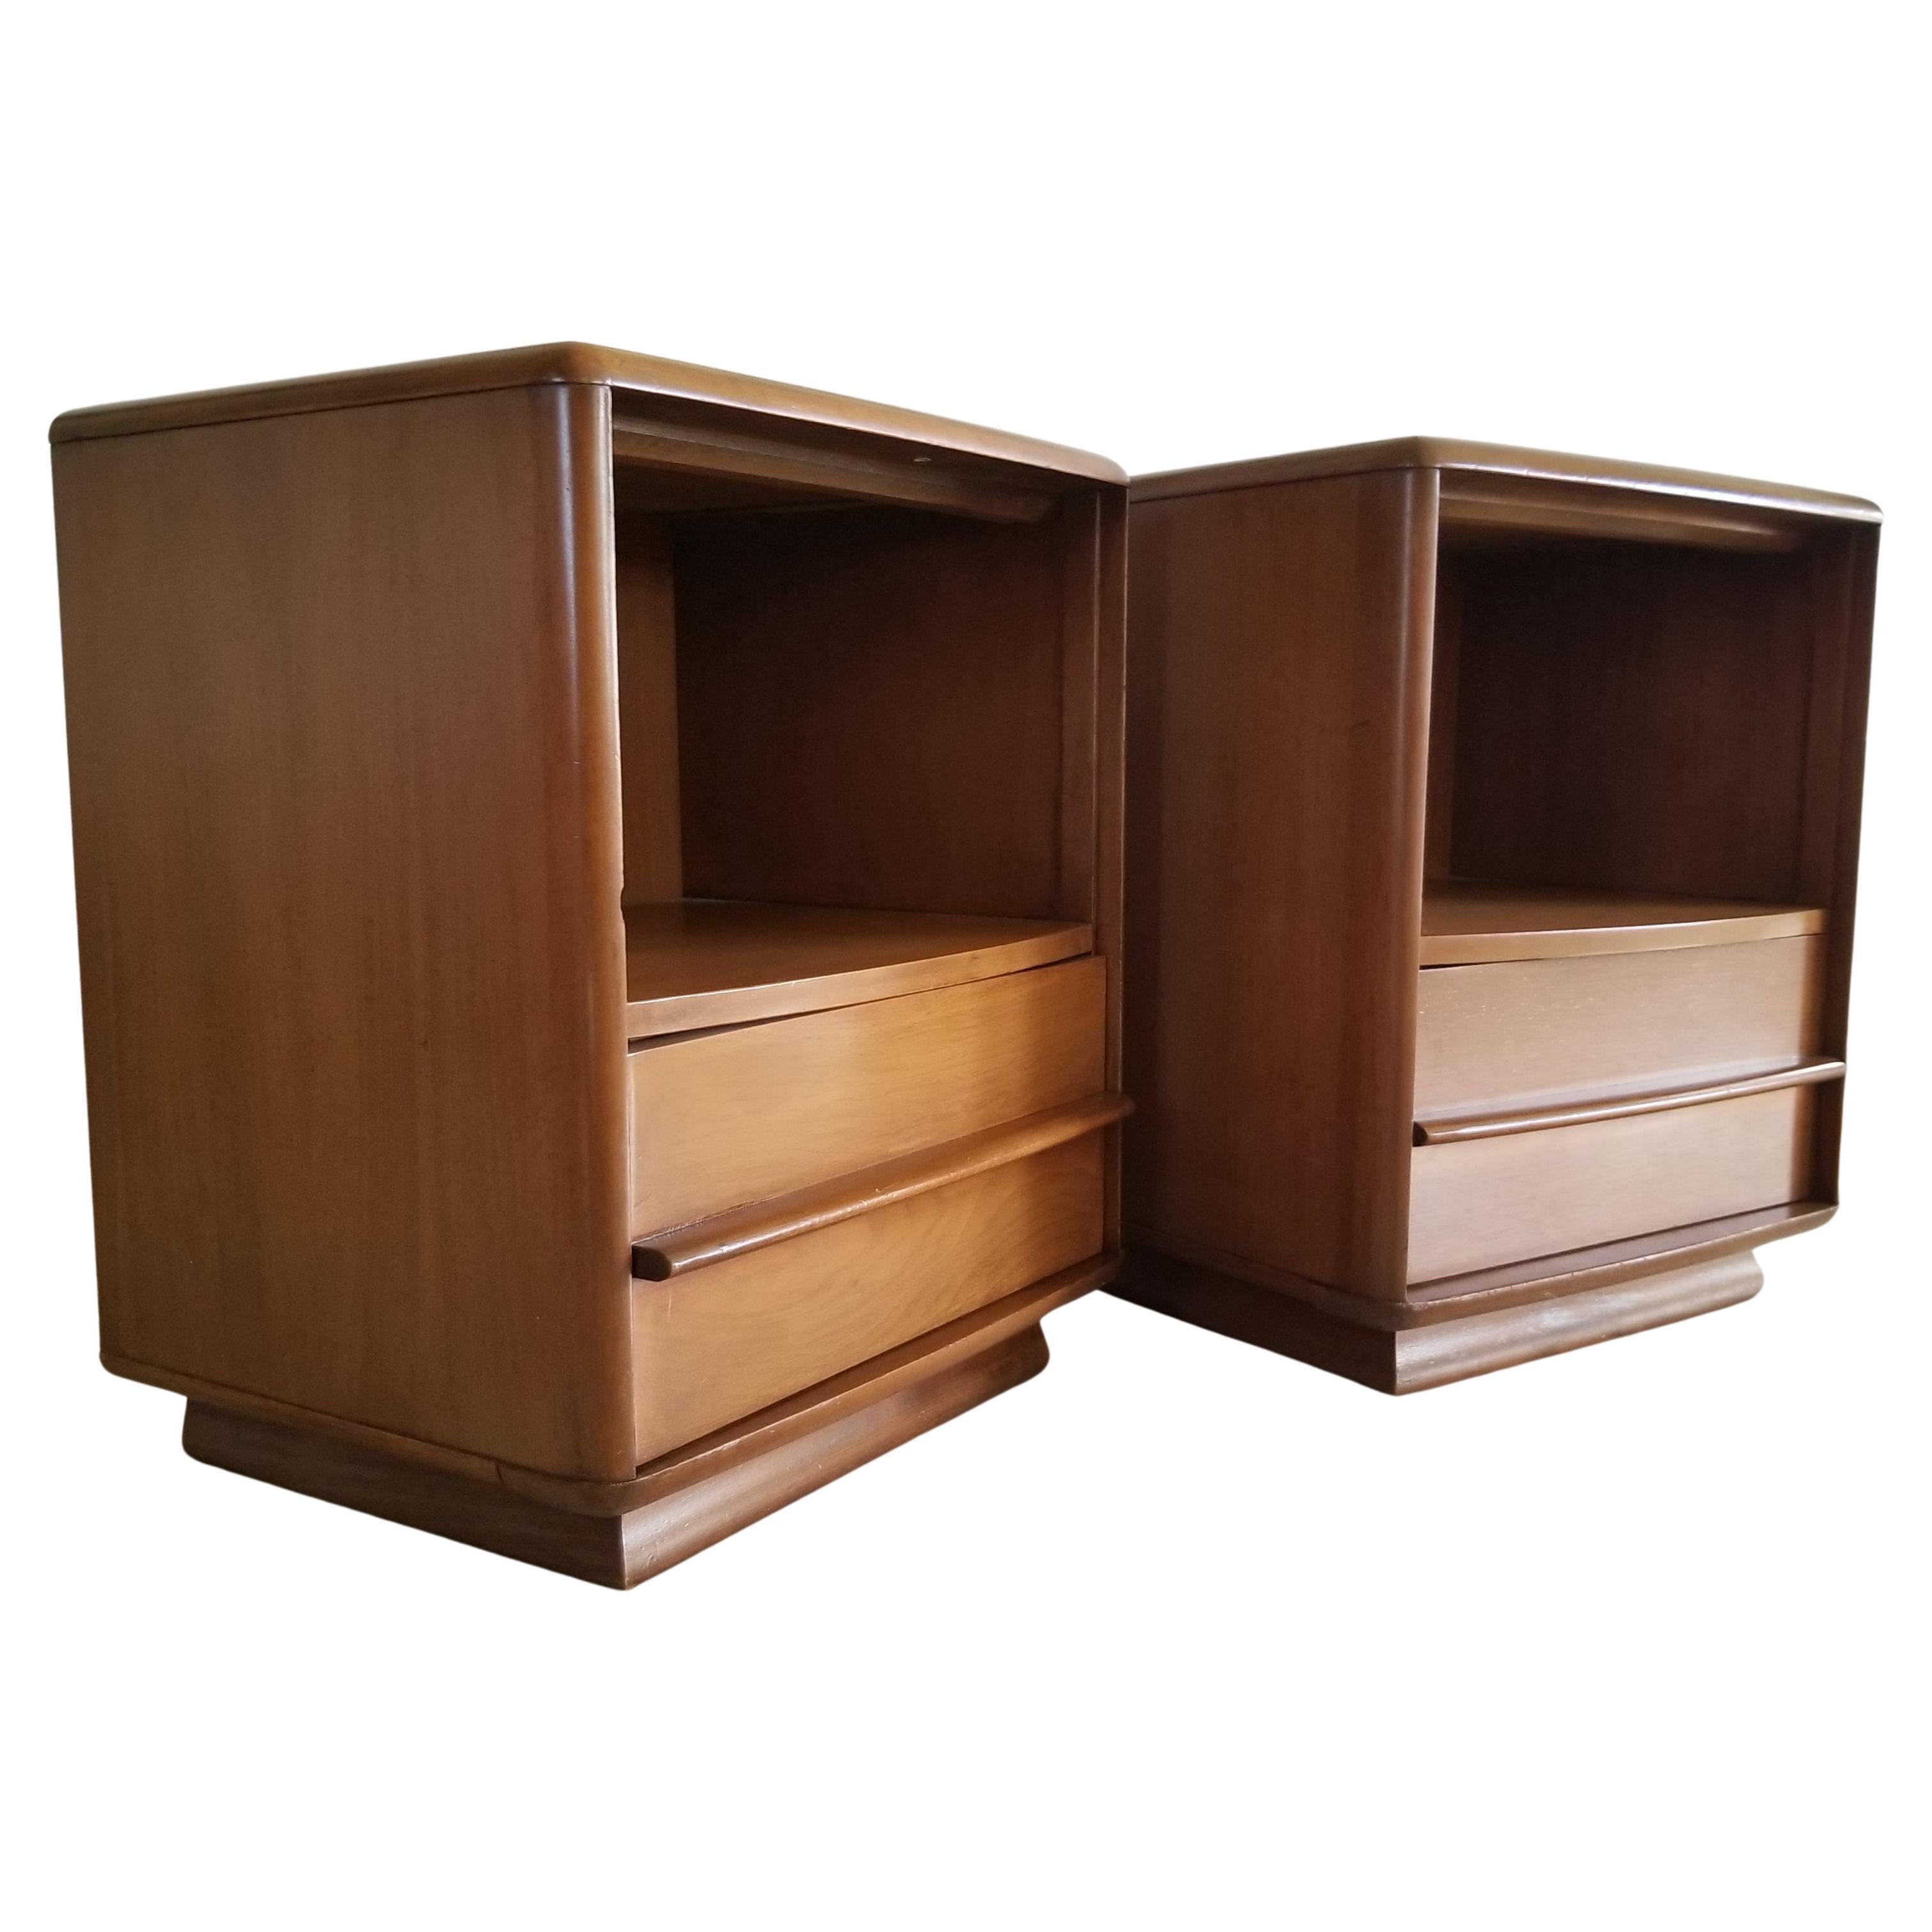 Nightstands by Kent Coffey
The modern Arcadia Nightstands with Drawer and big Cubby Space
1960s Curved design. Mahogany wood with a walnut finish.
Maker stamp present.
Tons of midcentury appeal. Strong and sturdy.
22w x 16.5d x 26 t